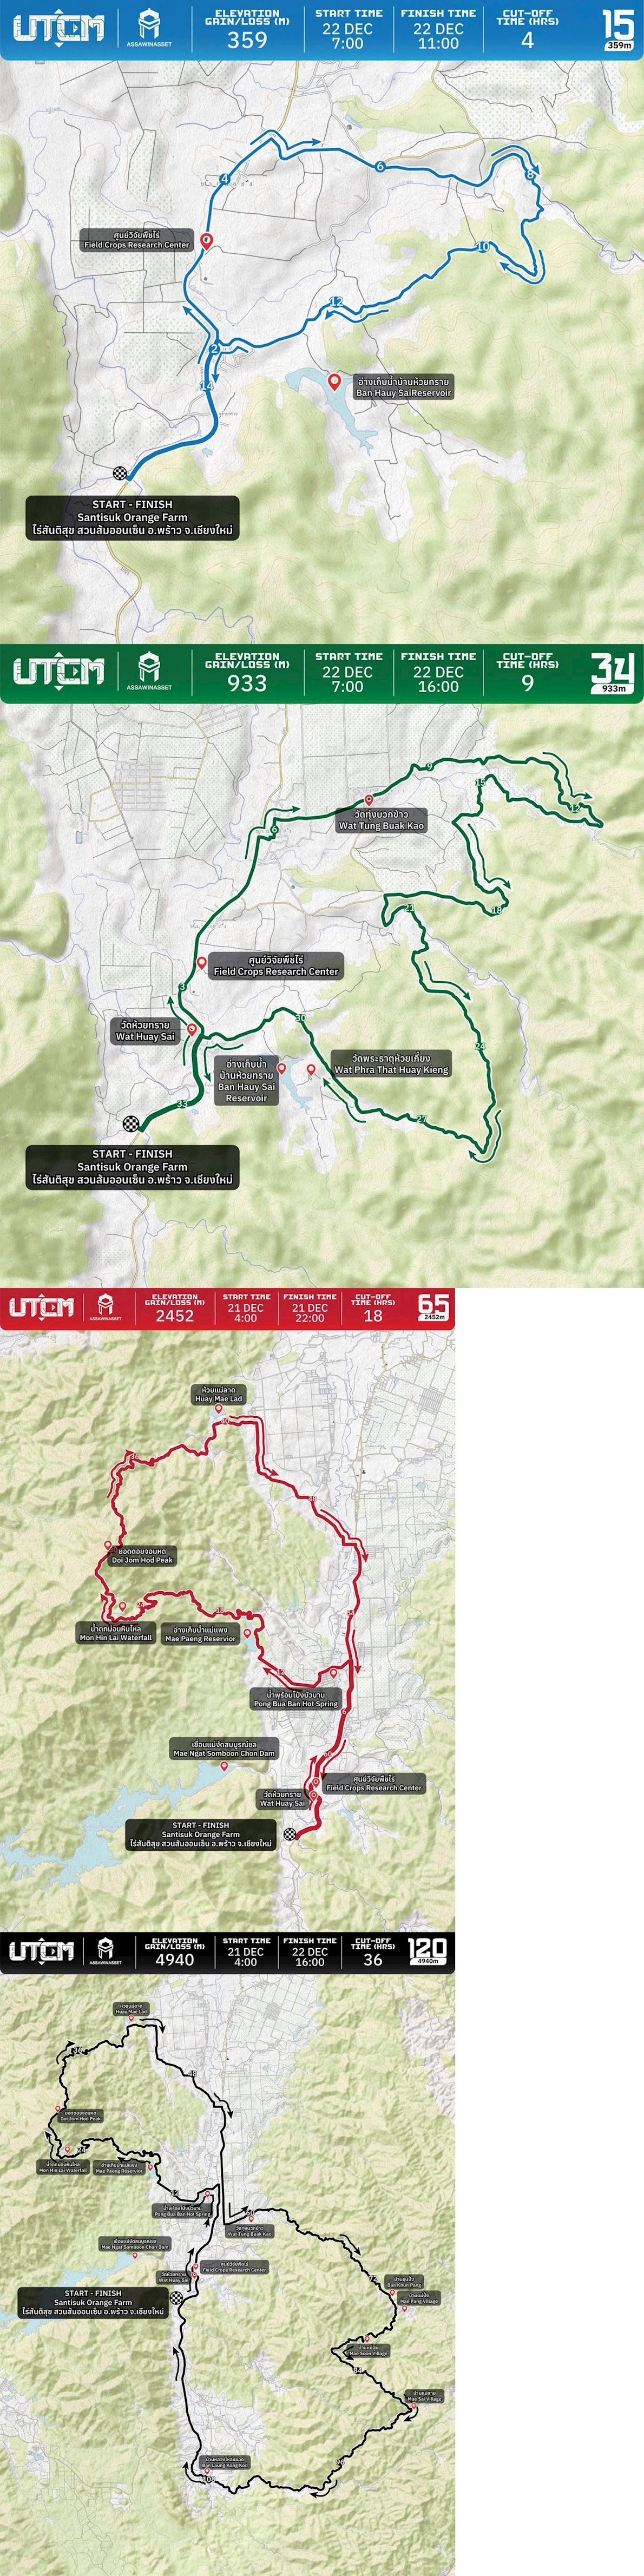 Ultra Trail Chiang Mai Route Map